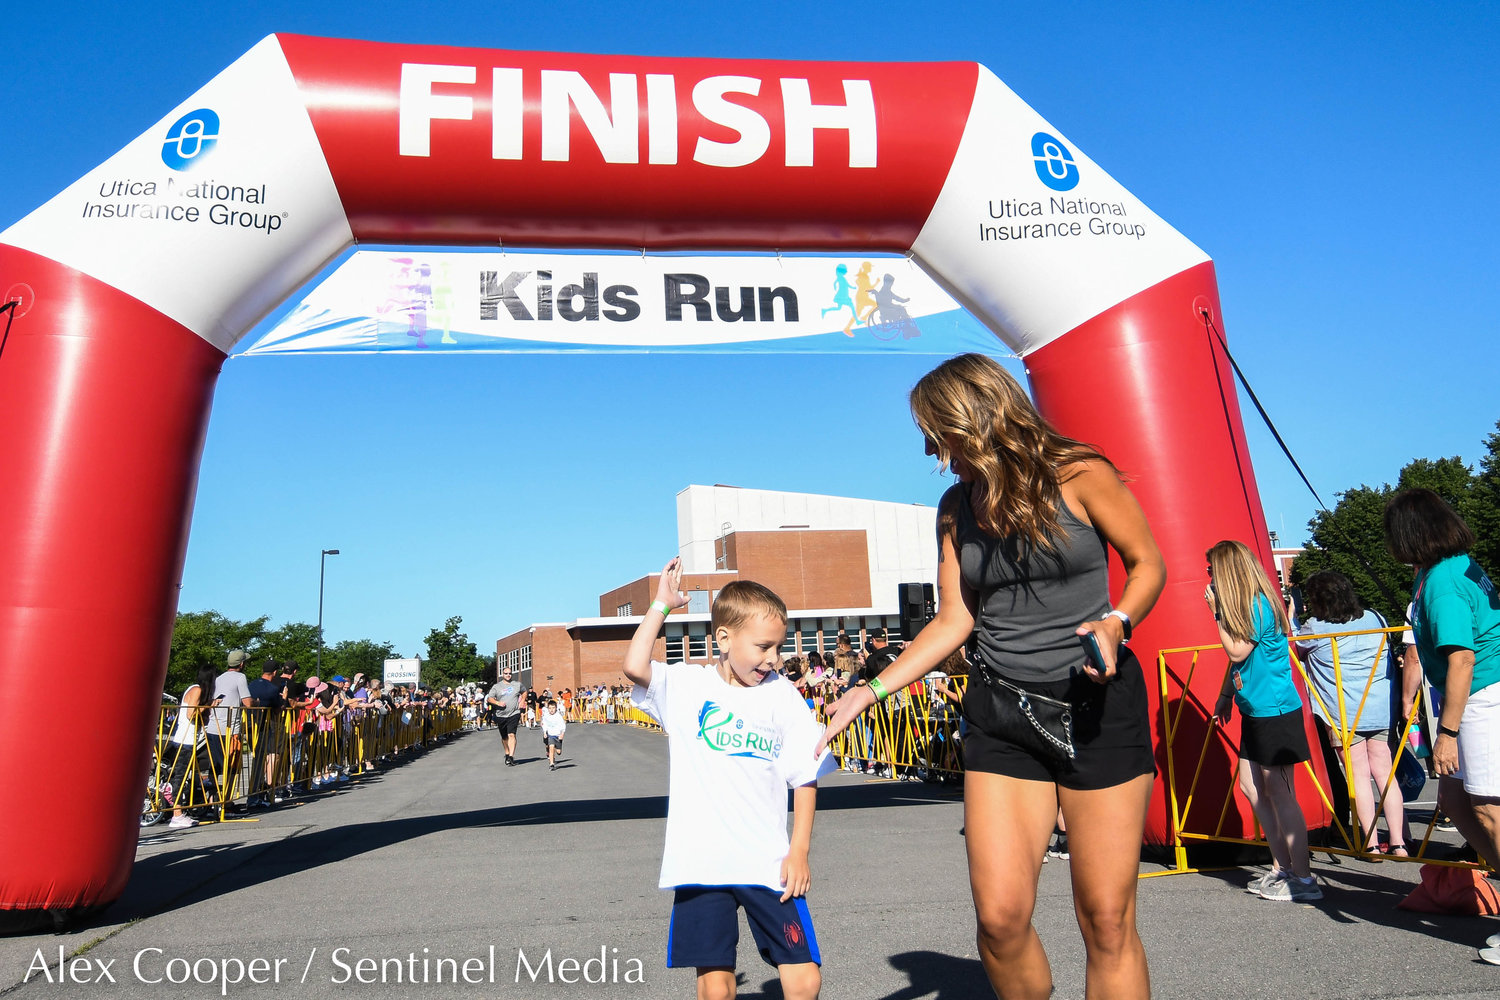 New York Mills resident Erika Fusco congratulates her son Joey after finishing the Utica National Kids Run together at Mohawk Valley Community College in Utica on Saturday.